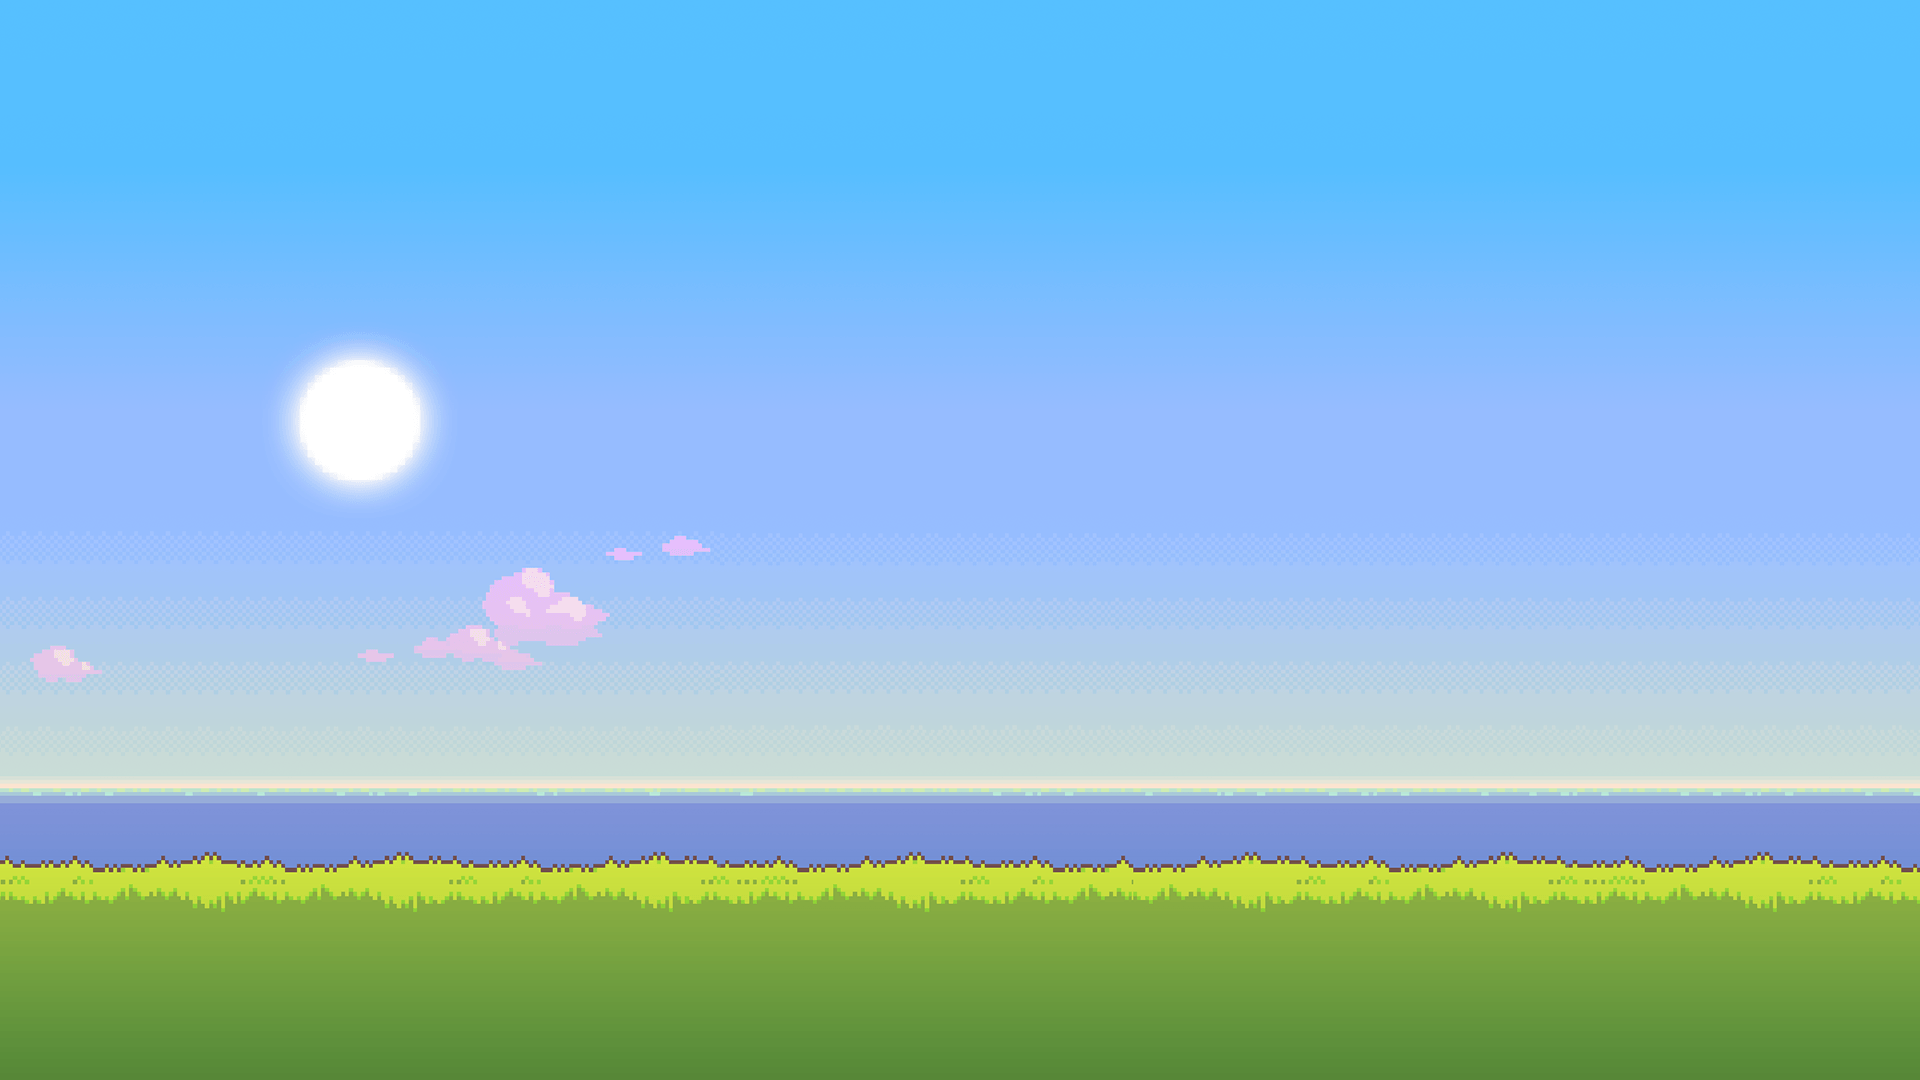 UPDATE: New version of the '8Bit Day' Wallpaper Set. Pixel wallpaper changes based on time of day! [Download different resolutions and installation instructions in comments.]